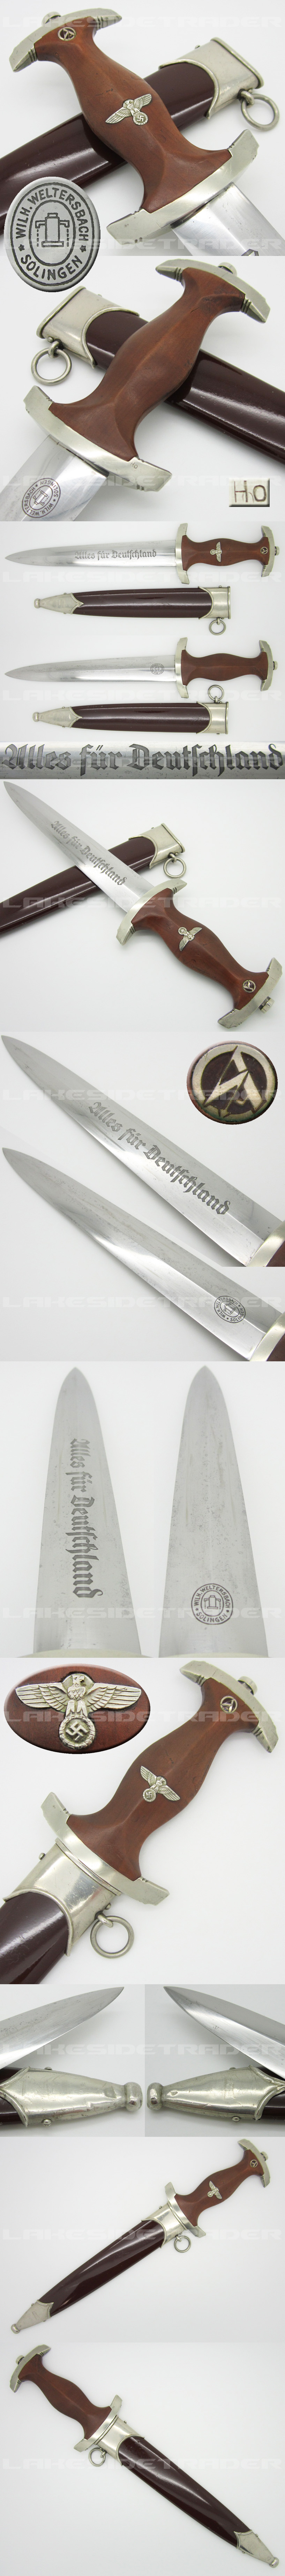 Early SA Dagger by Wilh. Weltersbach